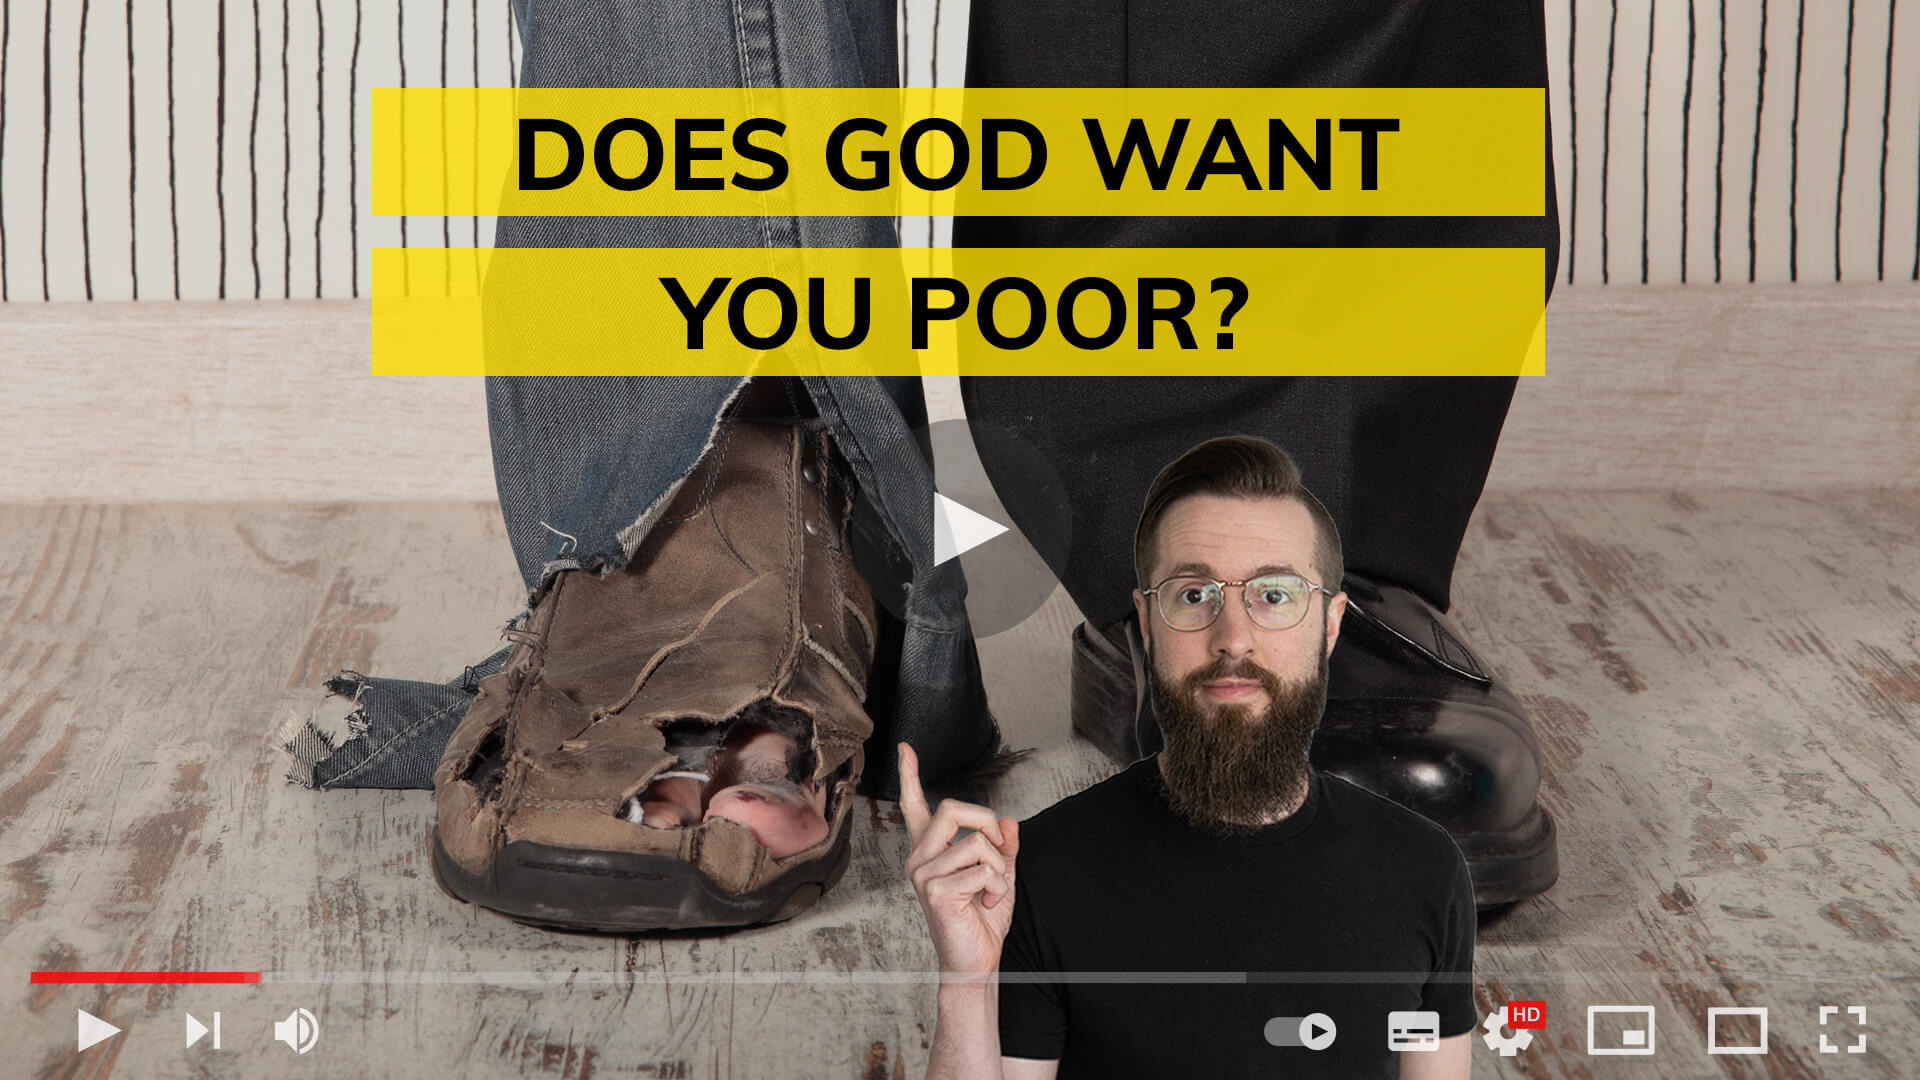 Does God want you poor?